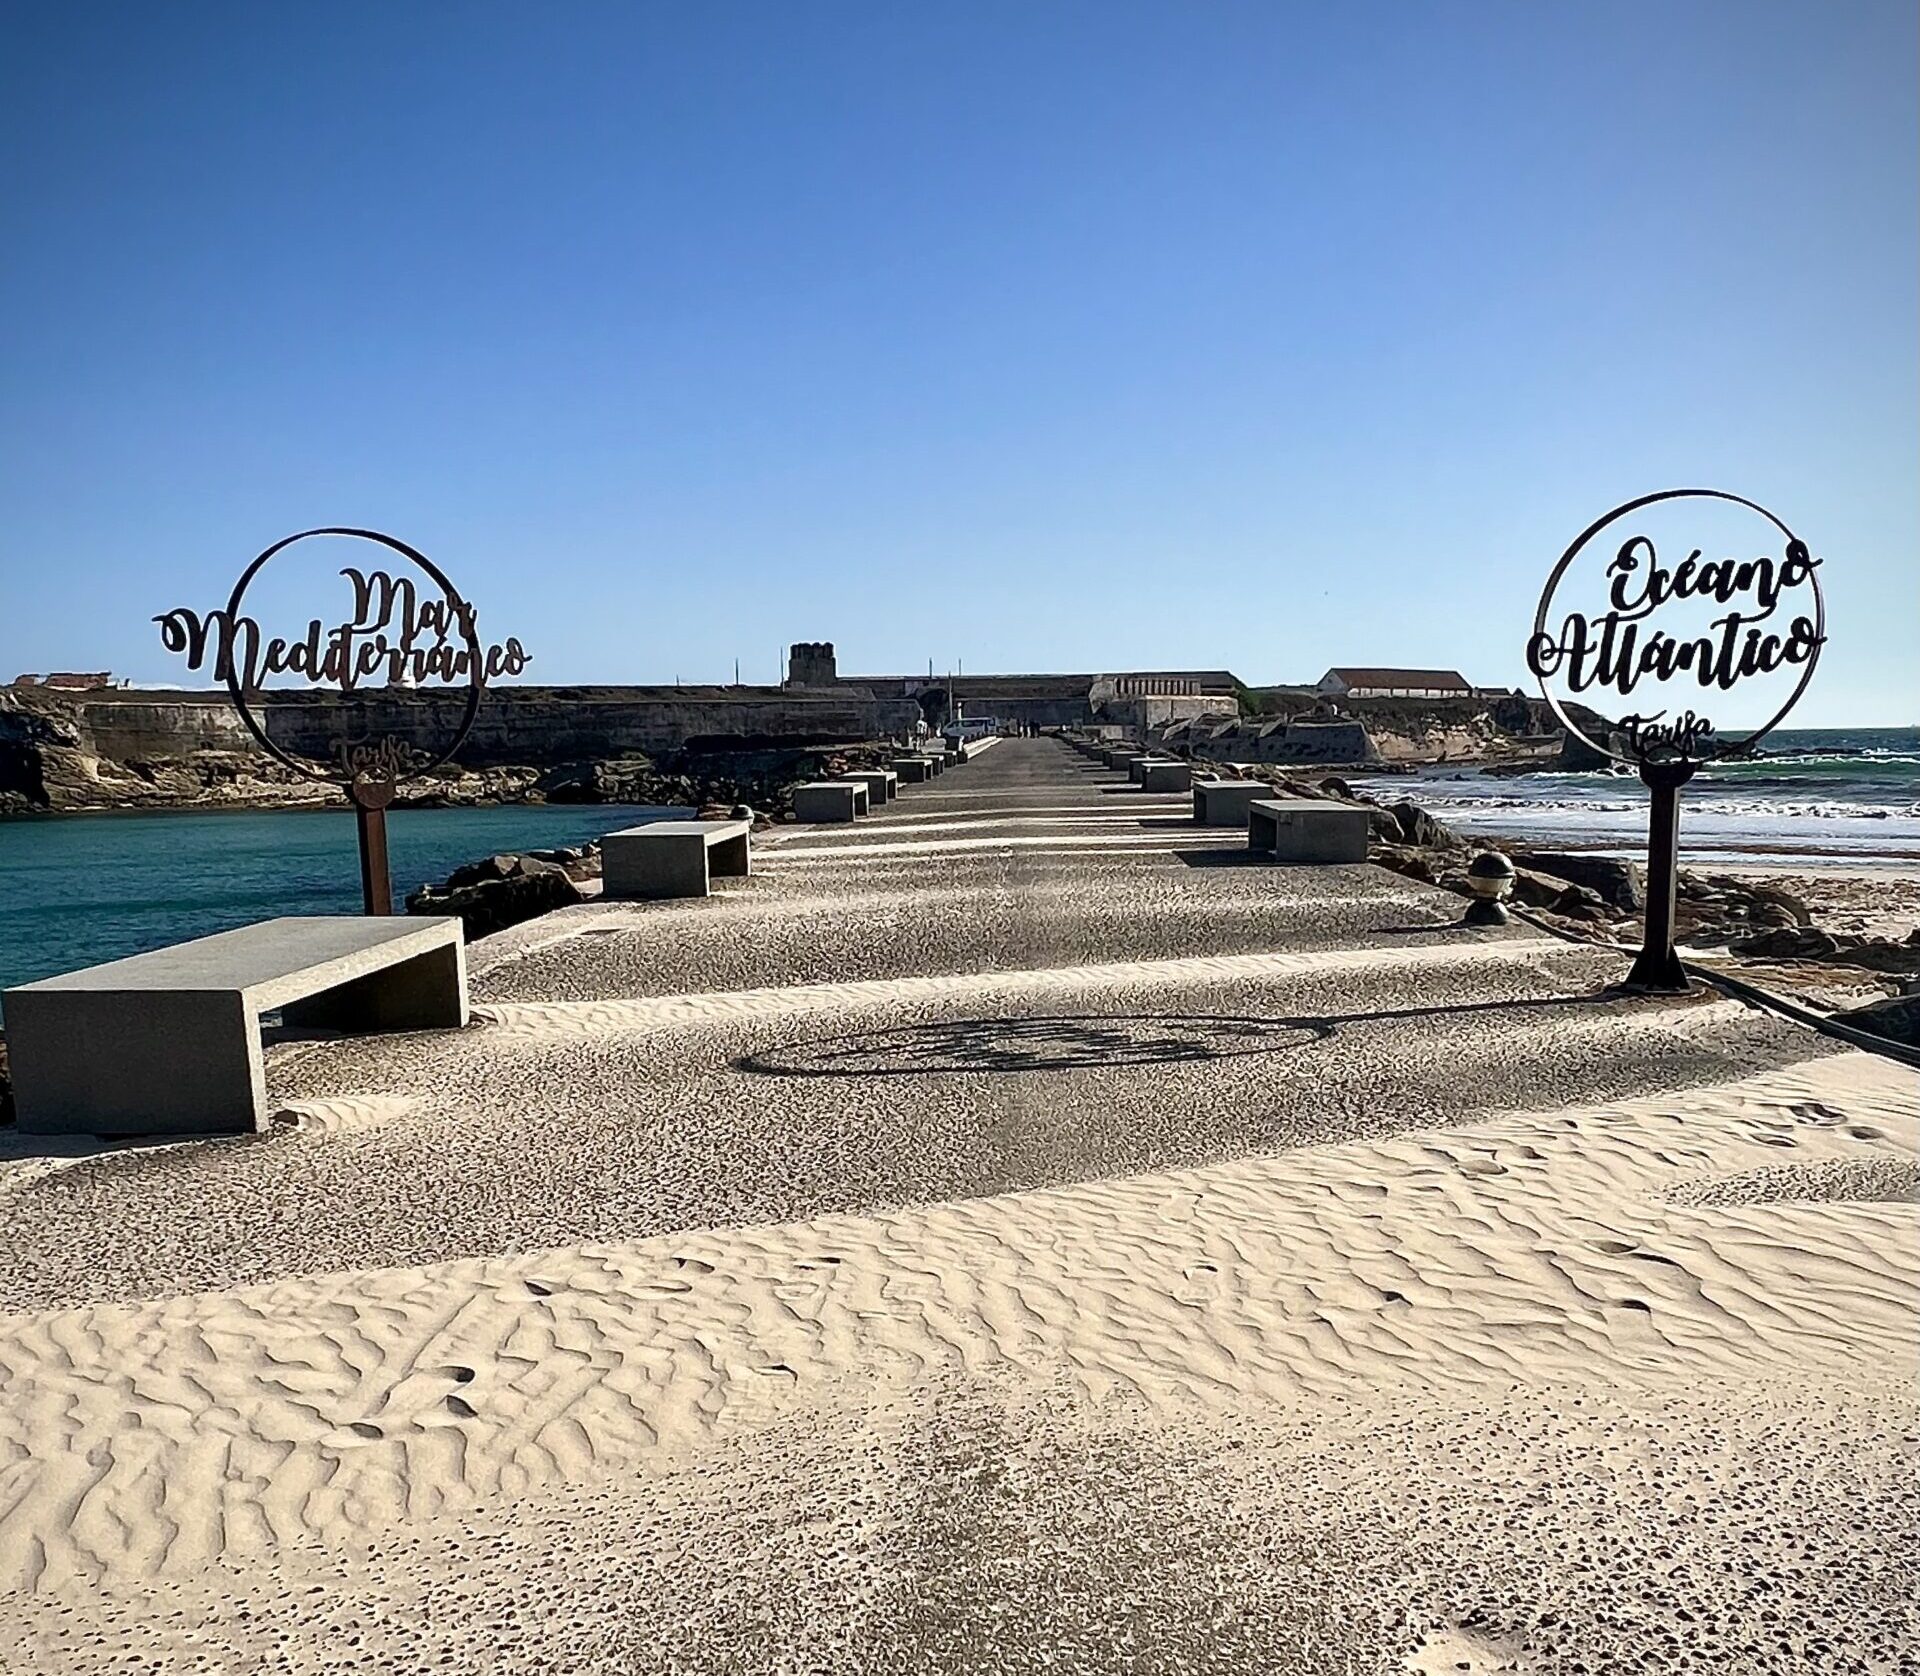 A long bridge jetty stretches out away from the camera into the distance, with water on either side. Two signs are on either side, with cursive script cut out of metal in a silhouette design. The left sign reads "mar mediterraneo" and the right reads "oceano atlantico"